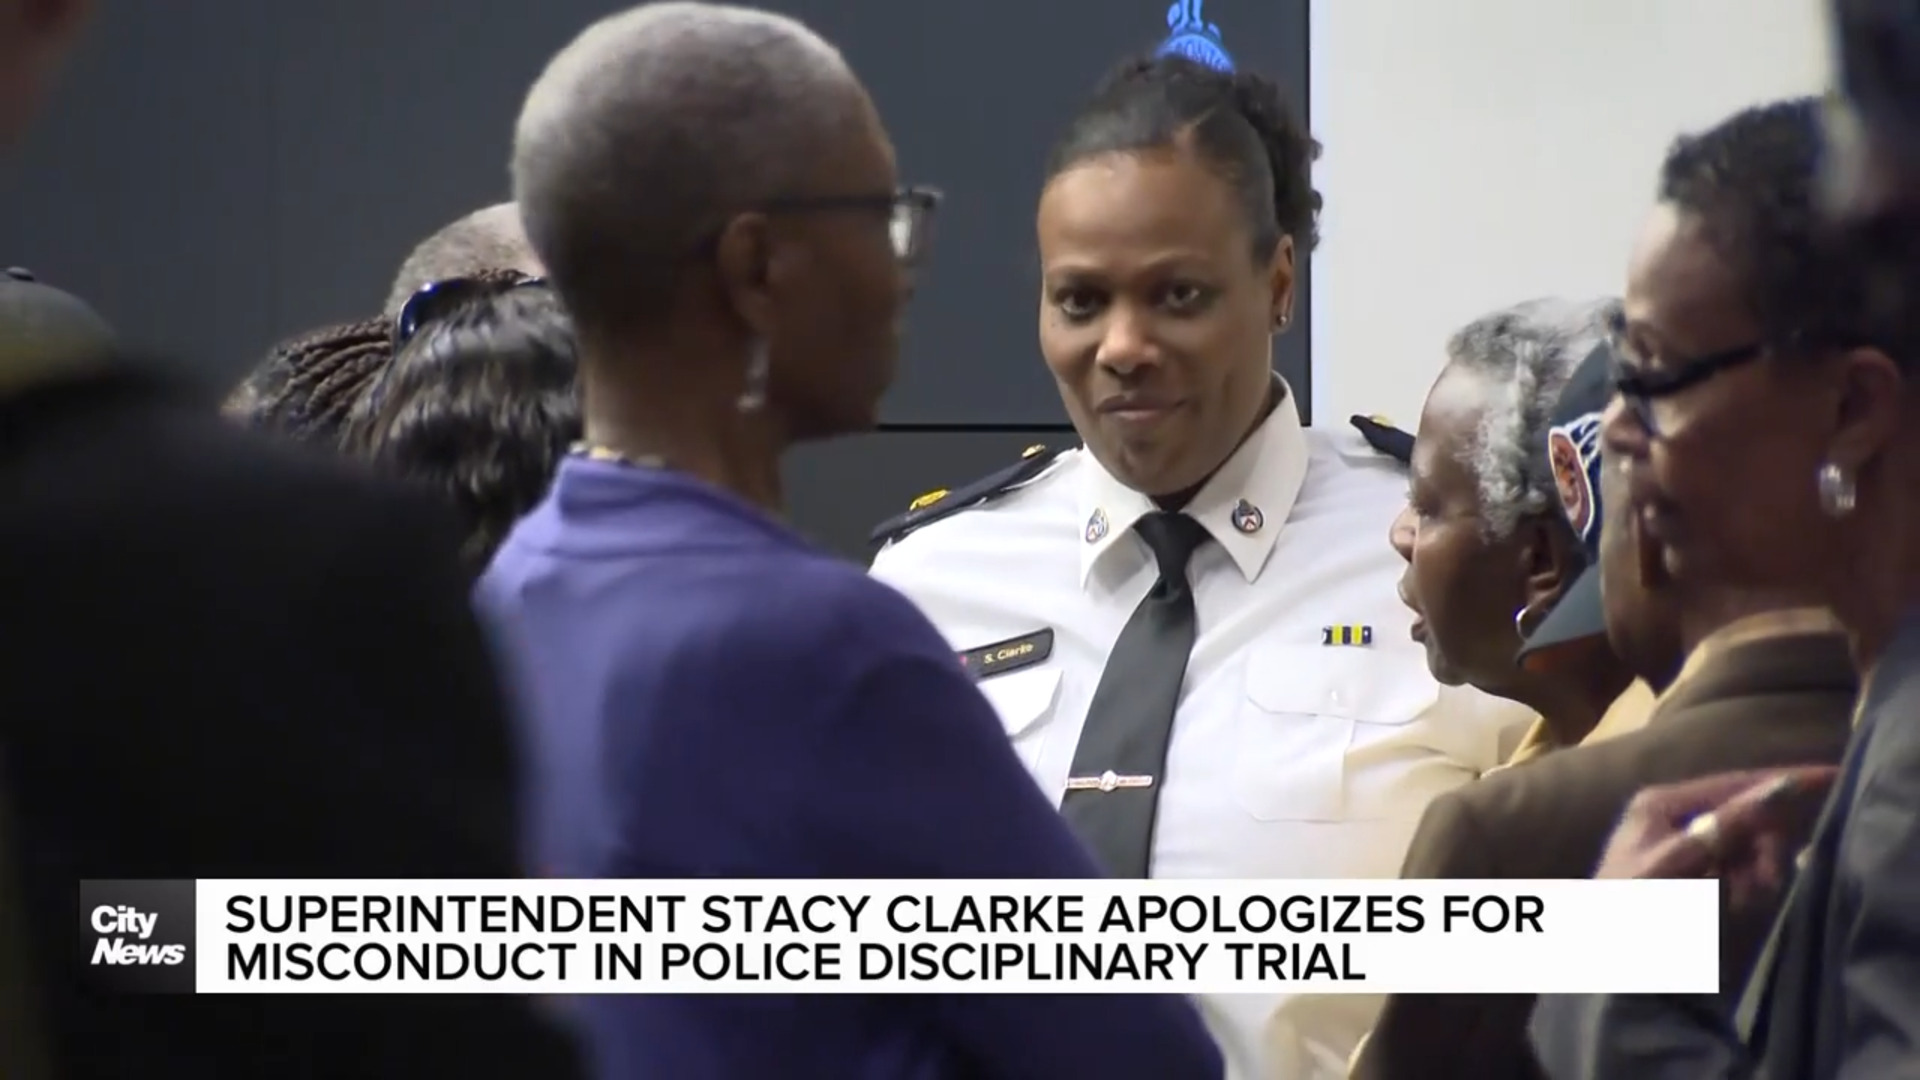 Superintendent Stacy Clarke apologizes at police disciplinary hearing